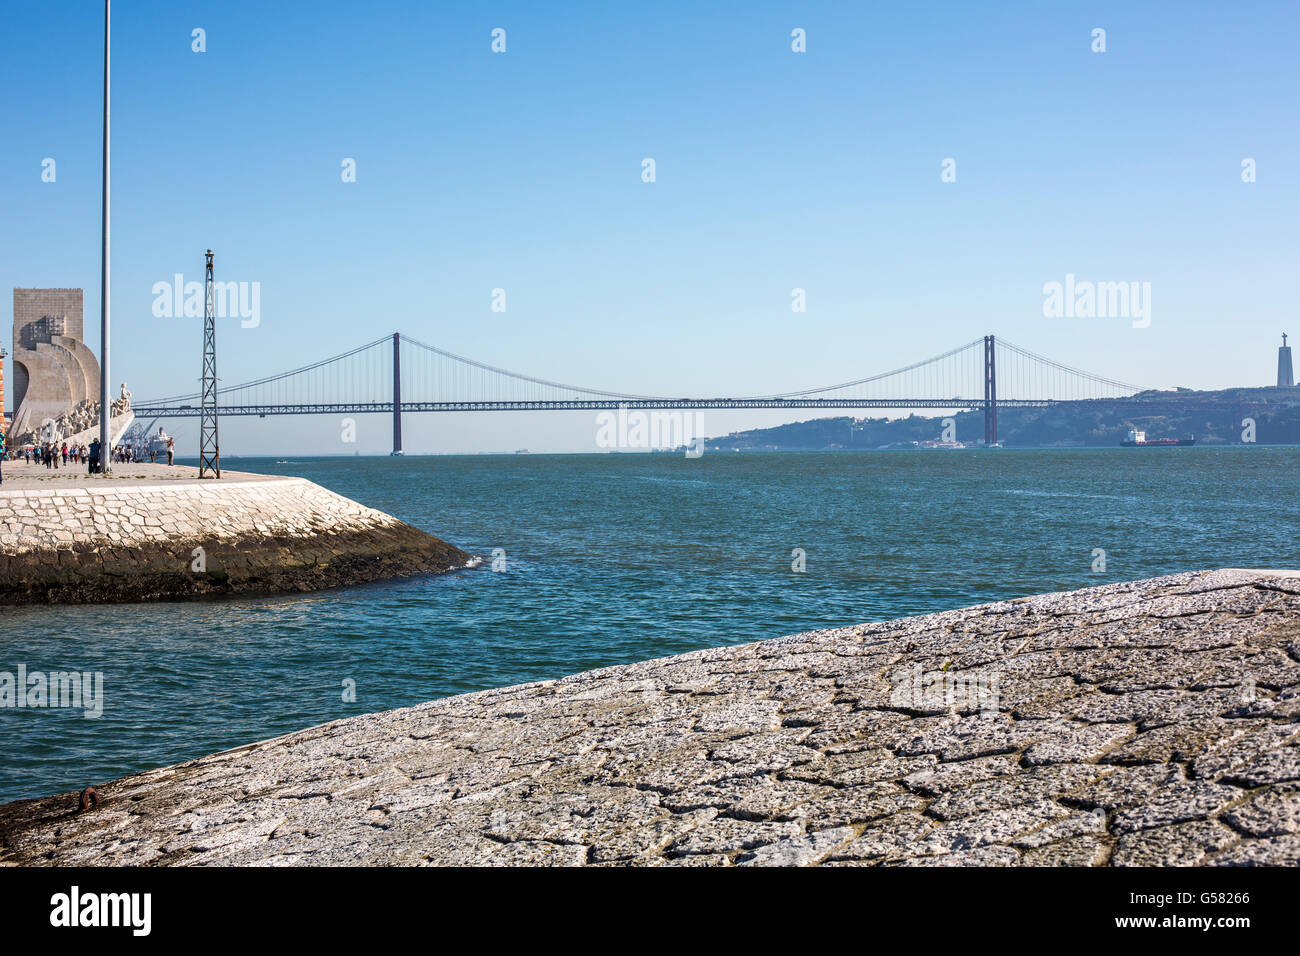 Belem, Lisbon, Portugal at the Monument to the Discoveries, Padrao dos Descobrimentos Stock Photo